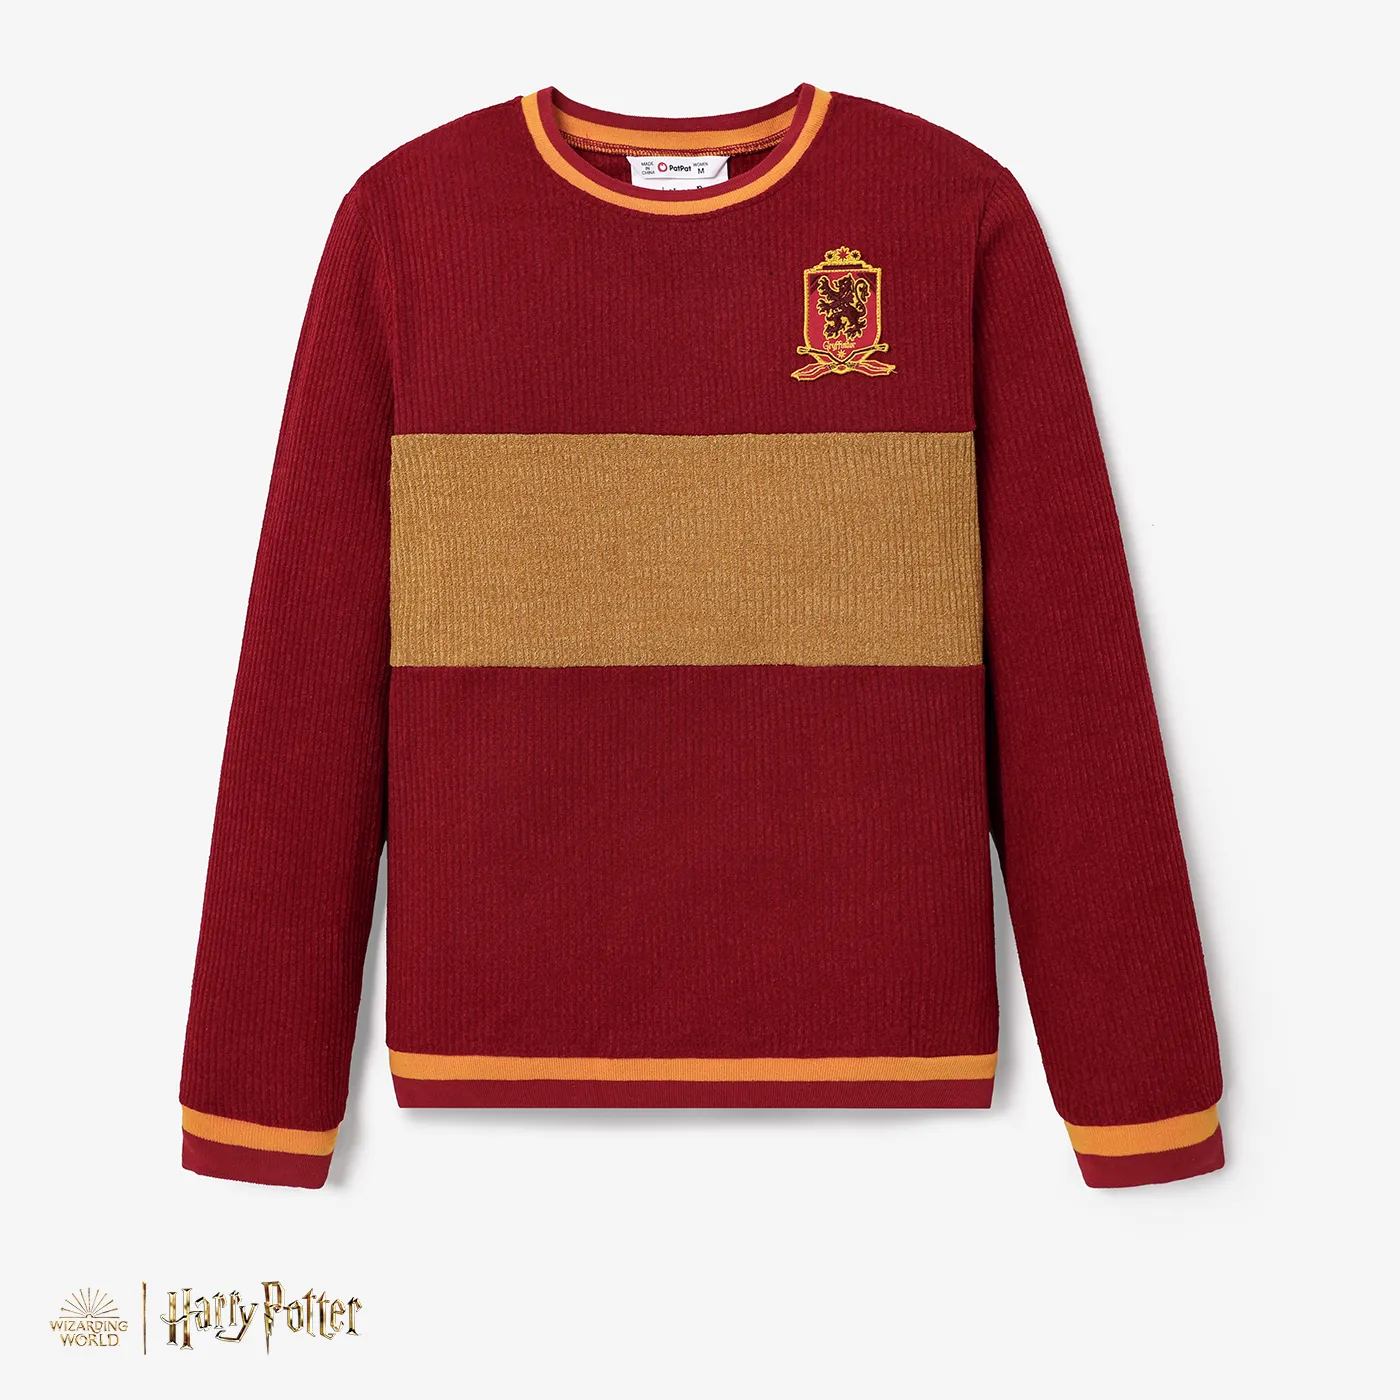 Harry Potter Family Matching Colorblock Character Print Long-sleeve Tops